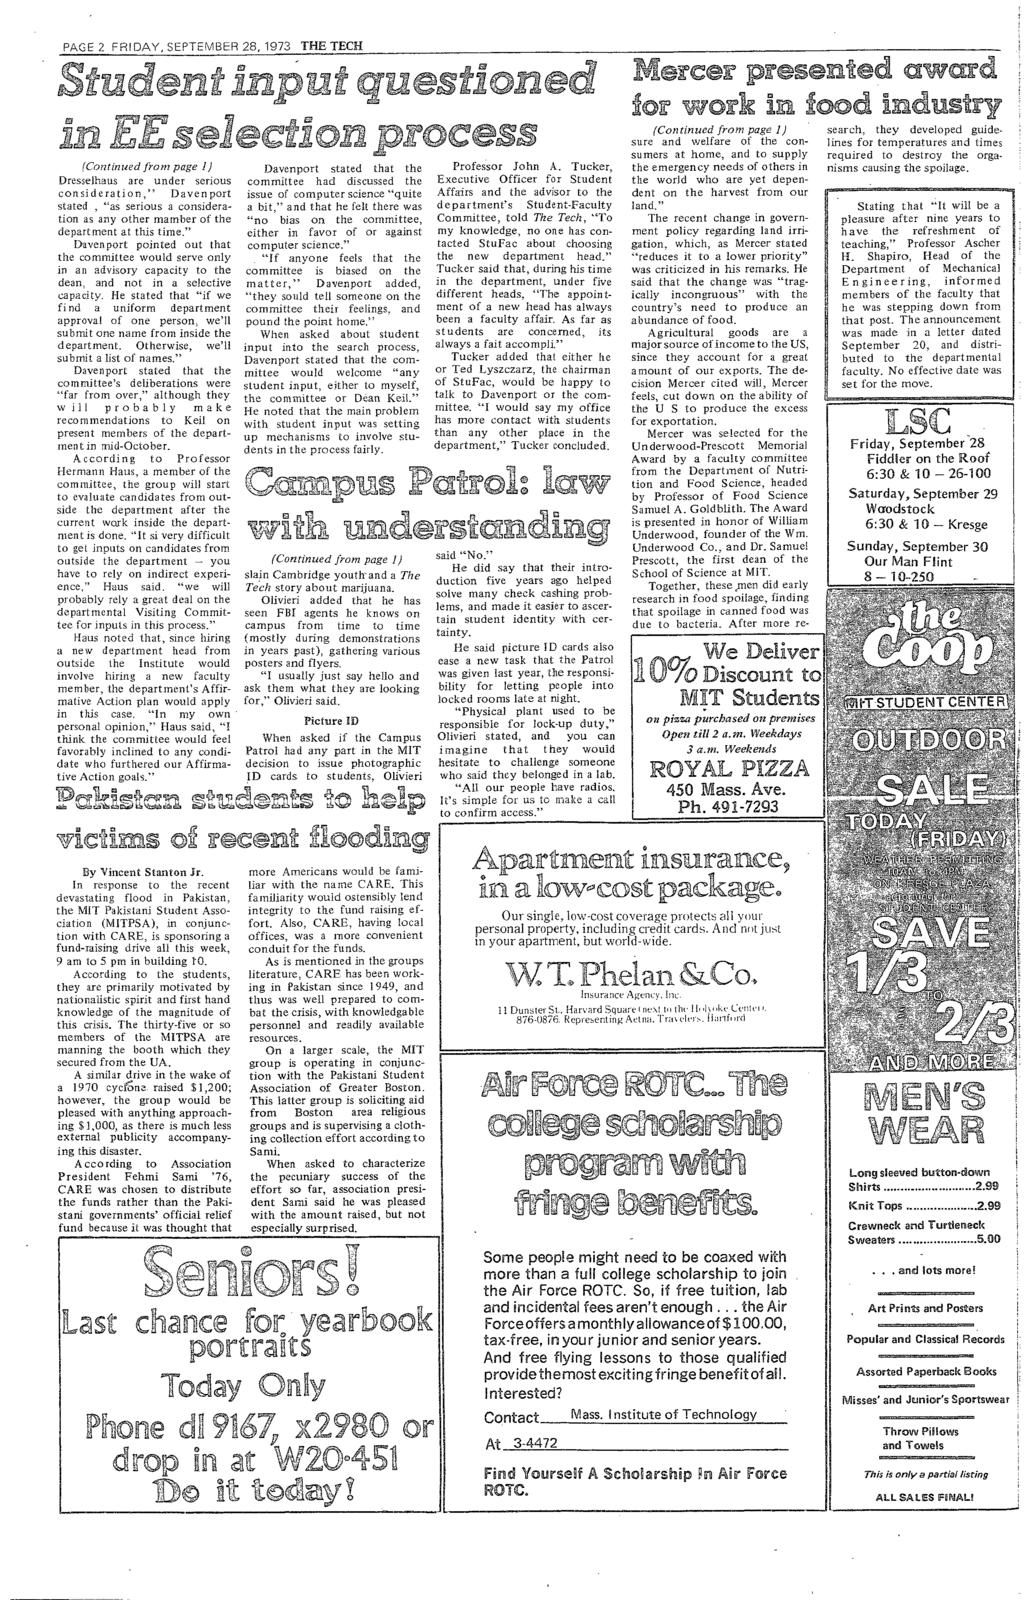 PAGE 2 FRDAY, SEPTEMBER 28, 1973 THE TECH,"P s e e cy, p :rec ~ (Contnued from page J Davenport et stated that the Dresselhaus are under serous commttee had dscussed the consderaton," Davenport ssue